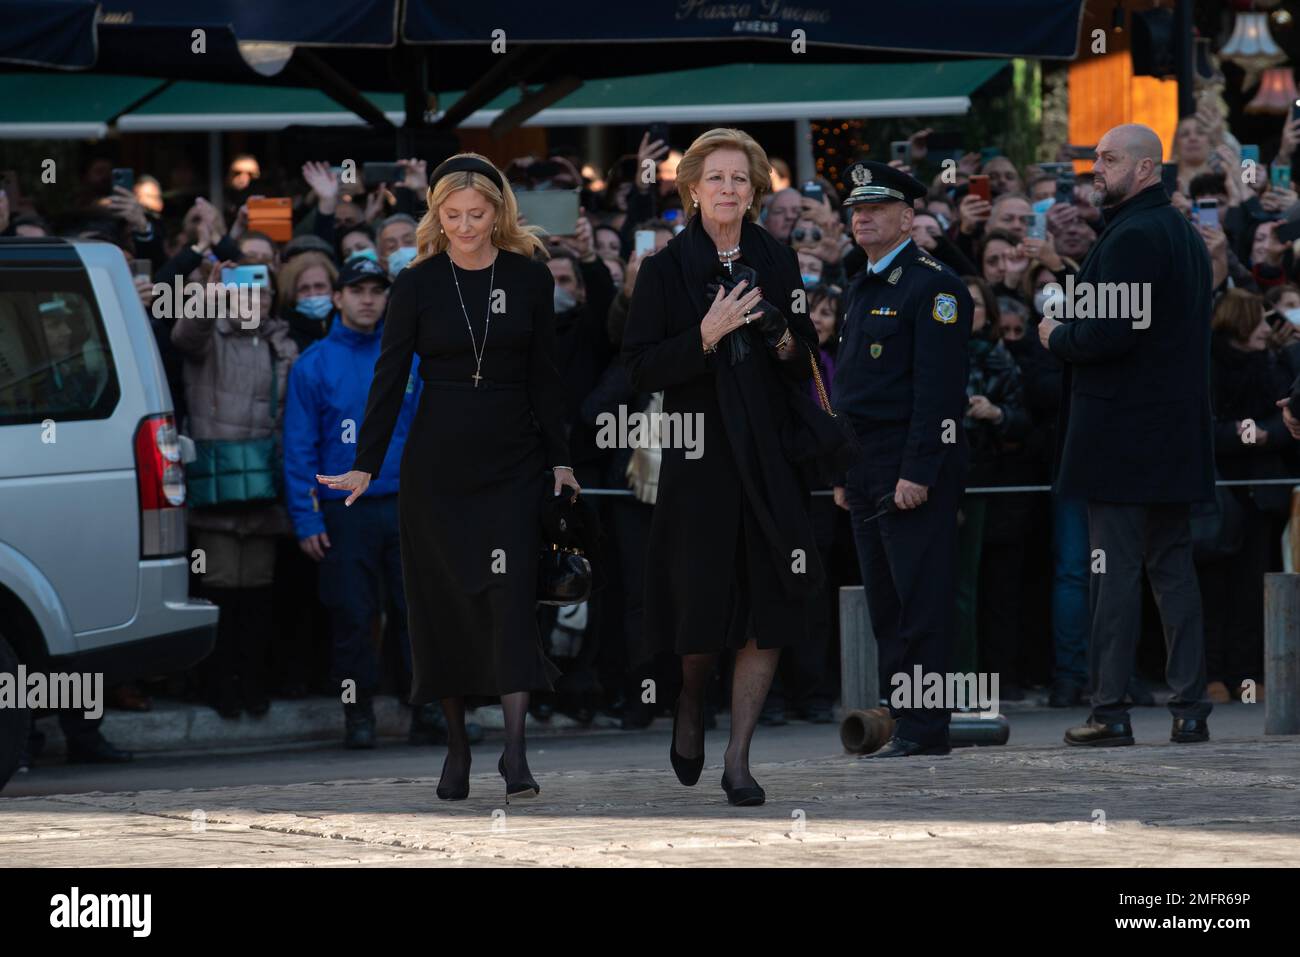 Athens, Greece. 16th January 2023. Crown Princess Marie-Chantal and Queen Anne-Marie arrive for the funeral of the former King Constantine II of Greece at the Metropolitan Cathedral of Athens. Credit: Nicolas Koutsokostas/Alamy Stock Photo. Stock Photo